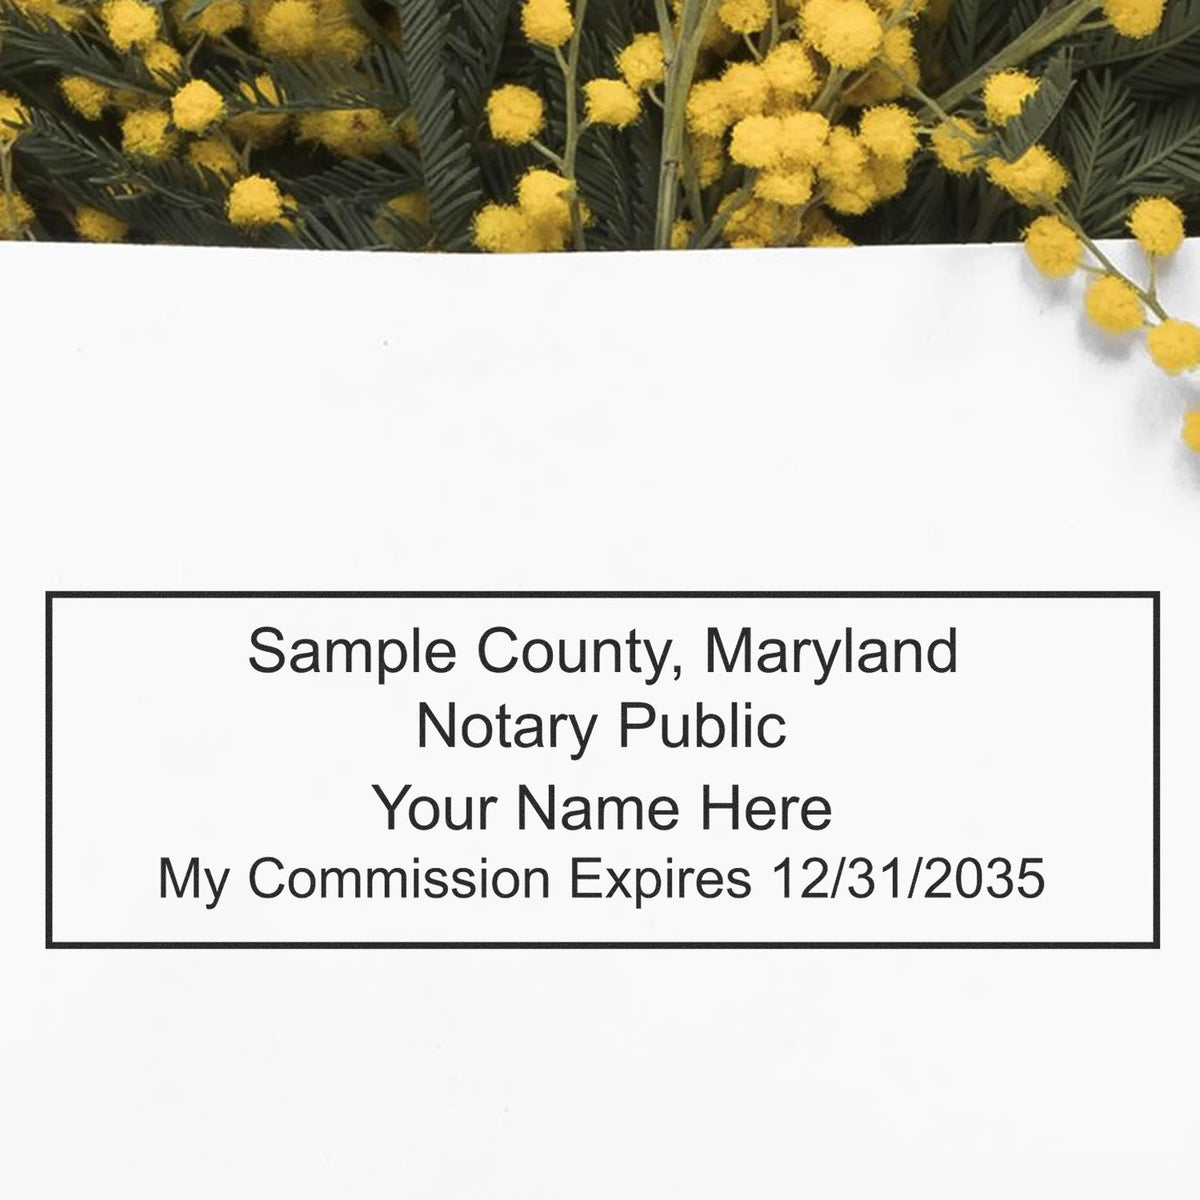 The Slim Pre-Inked Rectangular Notary Stamp for Maryland stamp impression comes to life with a crisp, detailed photo on paper - showcasing true professional quality.